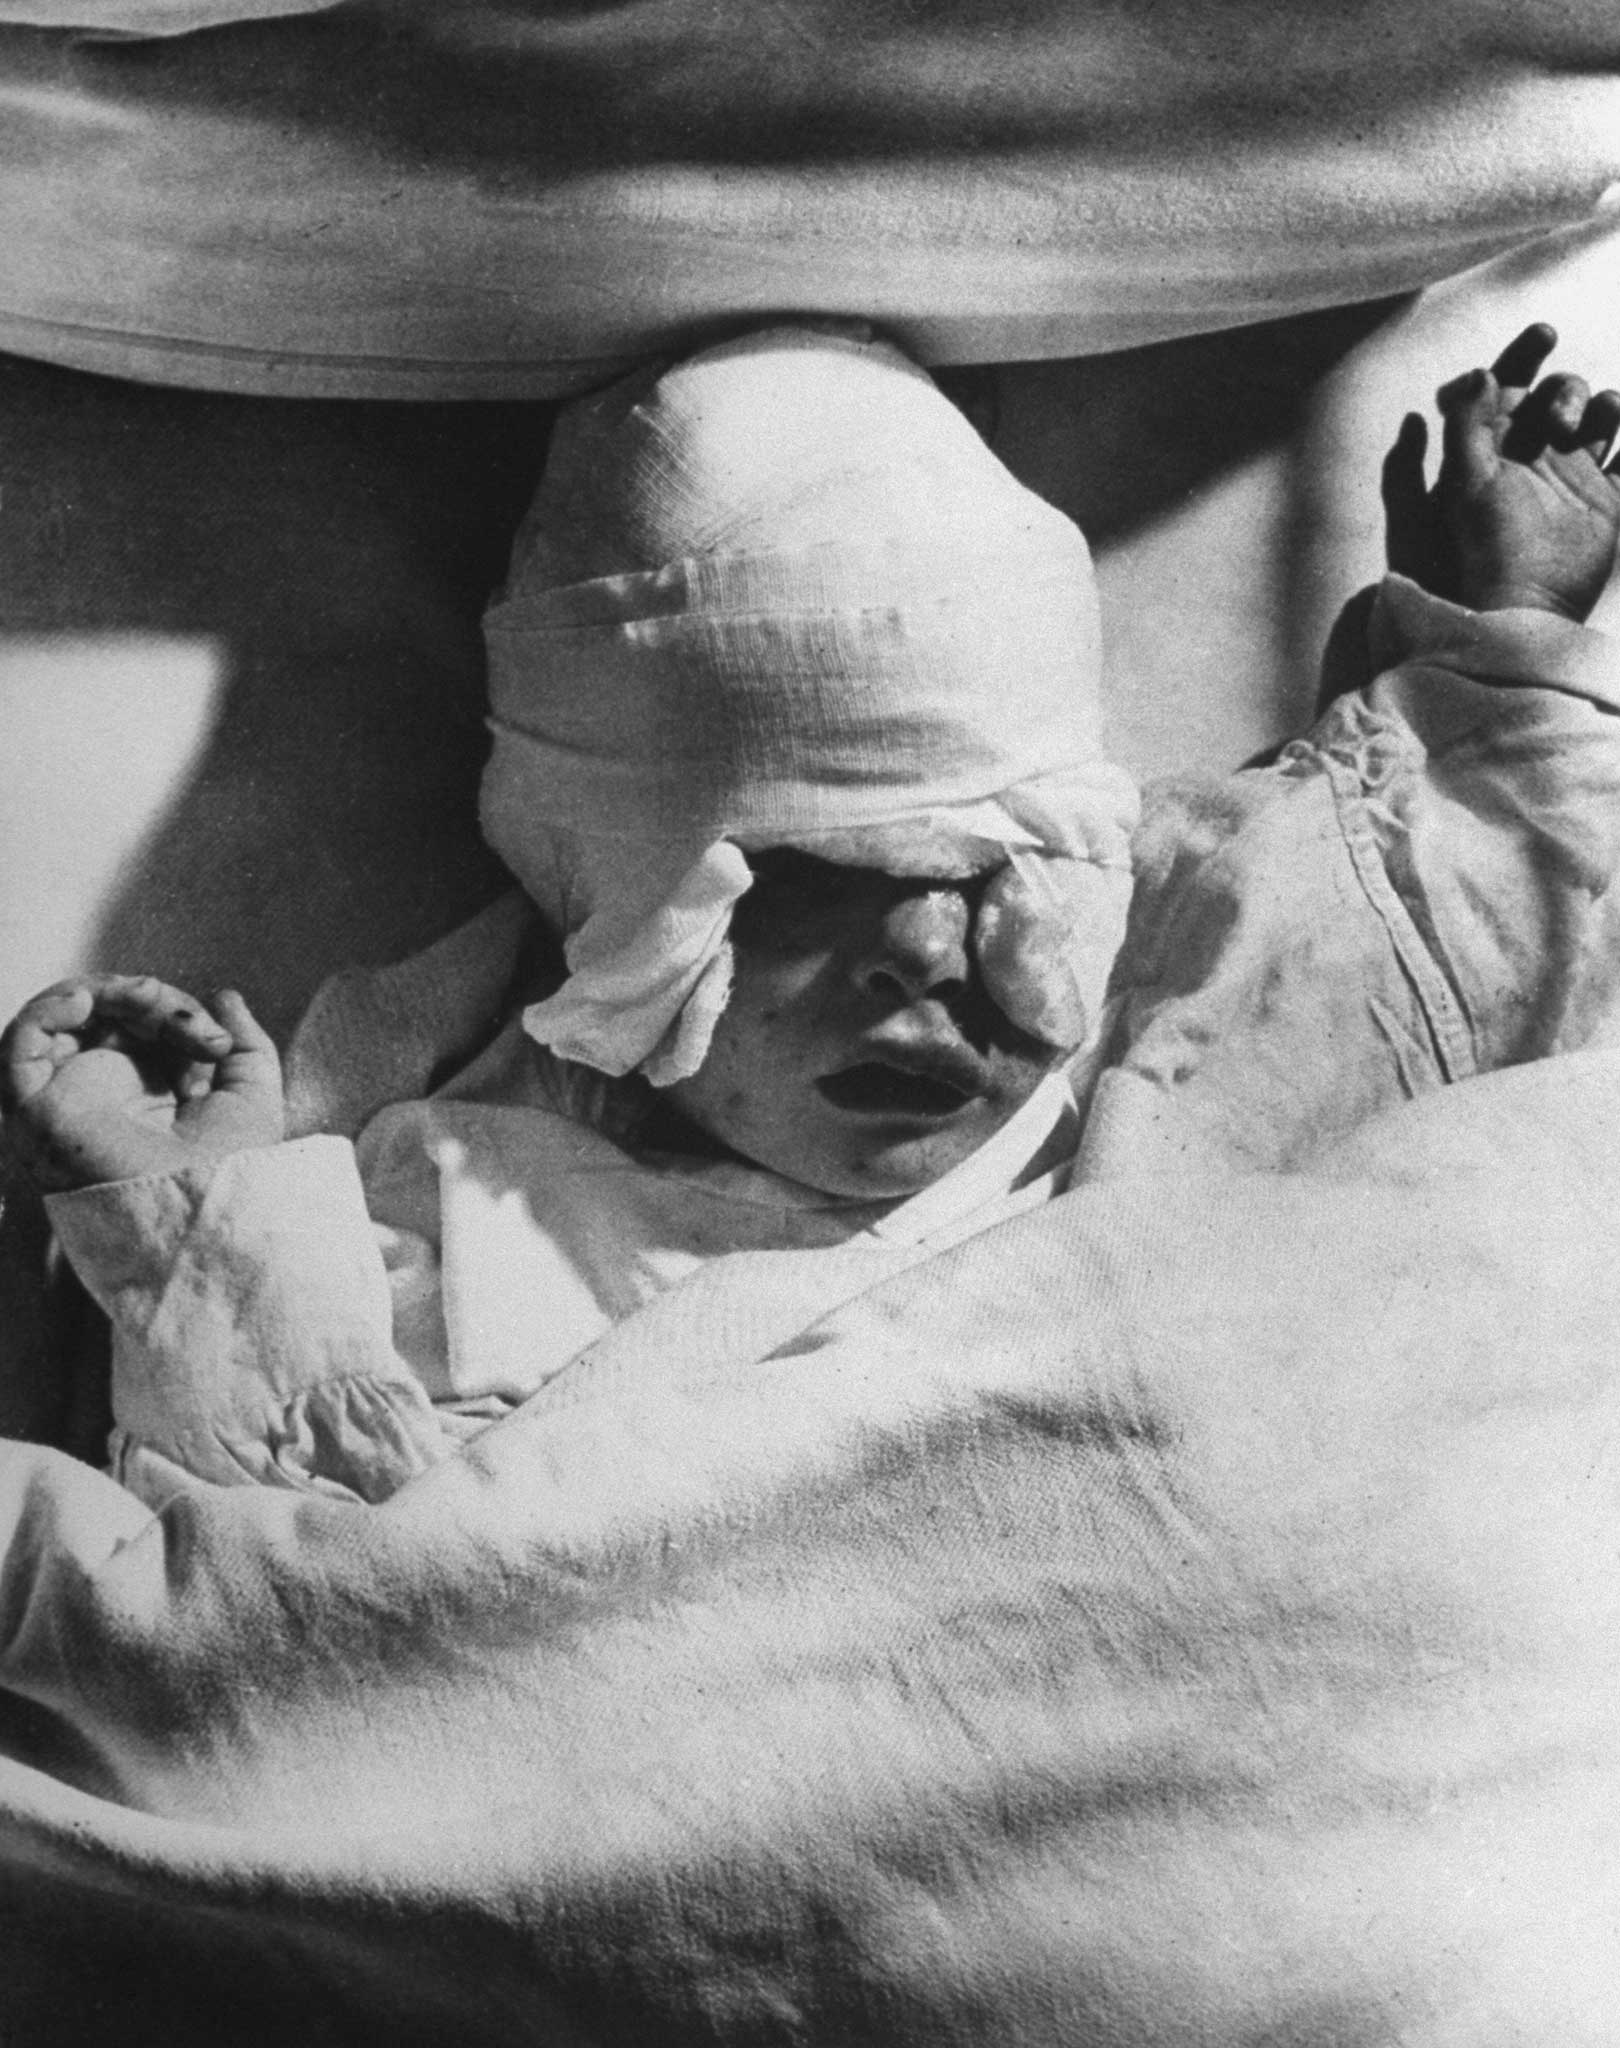 A heavily bandaged British infant, Margaret Curtis, badly injured in a German blitzkrieg attack on London during the Battle of Britain. Originally published in the September 9, 1940, issue of LIFE.